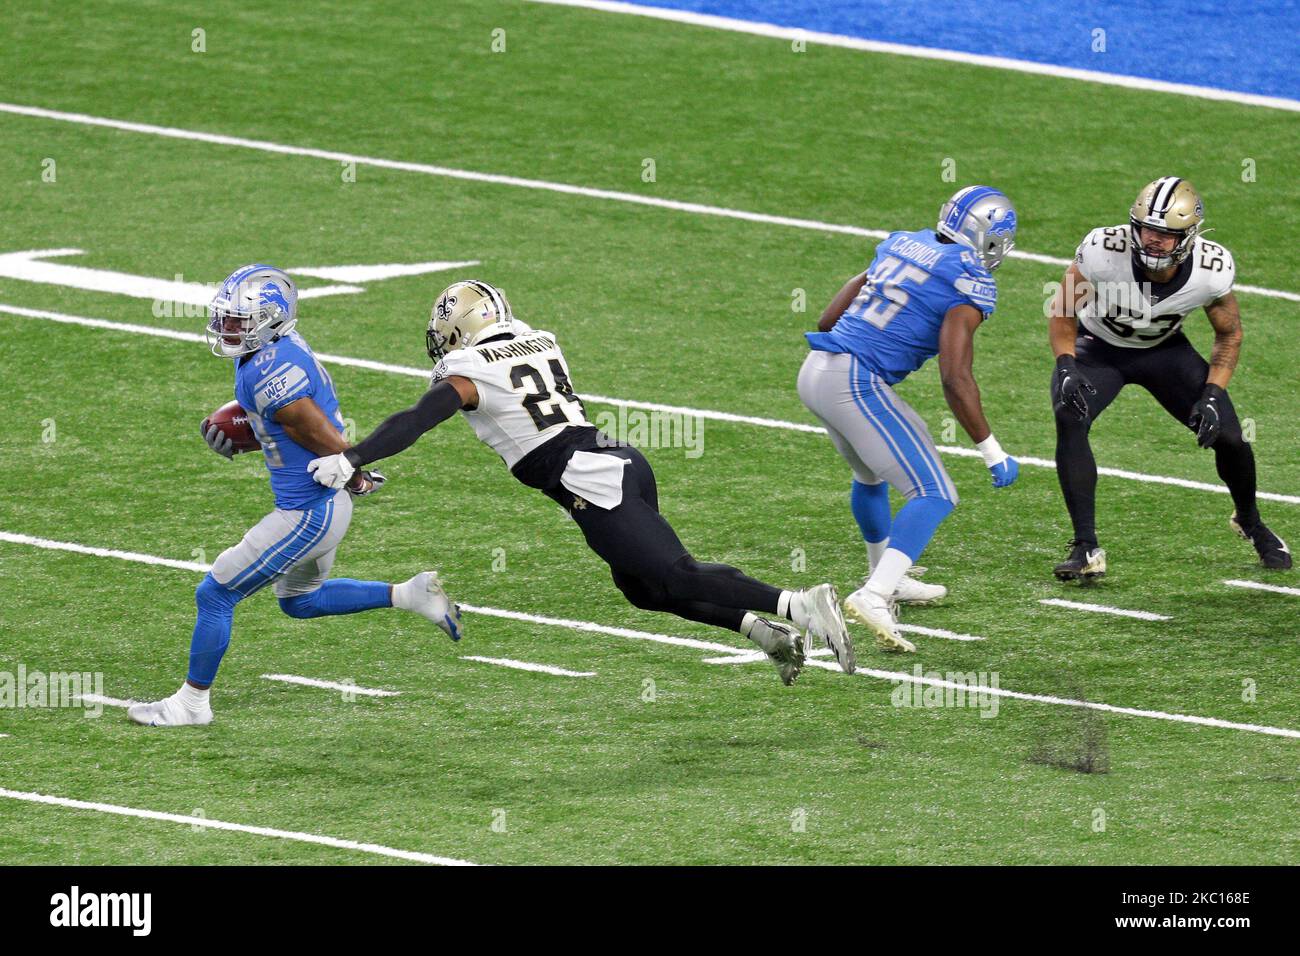 Detroit Lions safety Miles Killebrew (35) runs the ball against New Orleans Saints running back Dwayne Washington (24) during the first half of an NFL football game in Detroit, Michigan USA, on Sunday, October 4, 2020 (Photo by Jorge Lemus/NurPhoto) Stock Photo